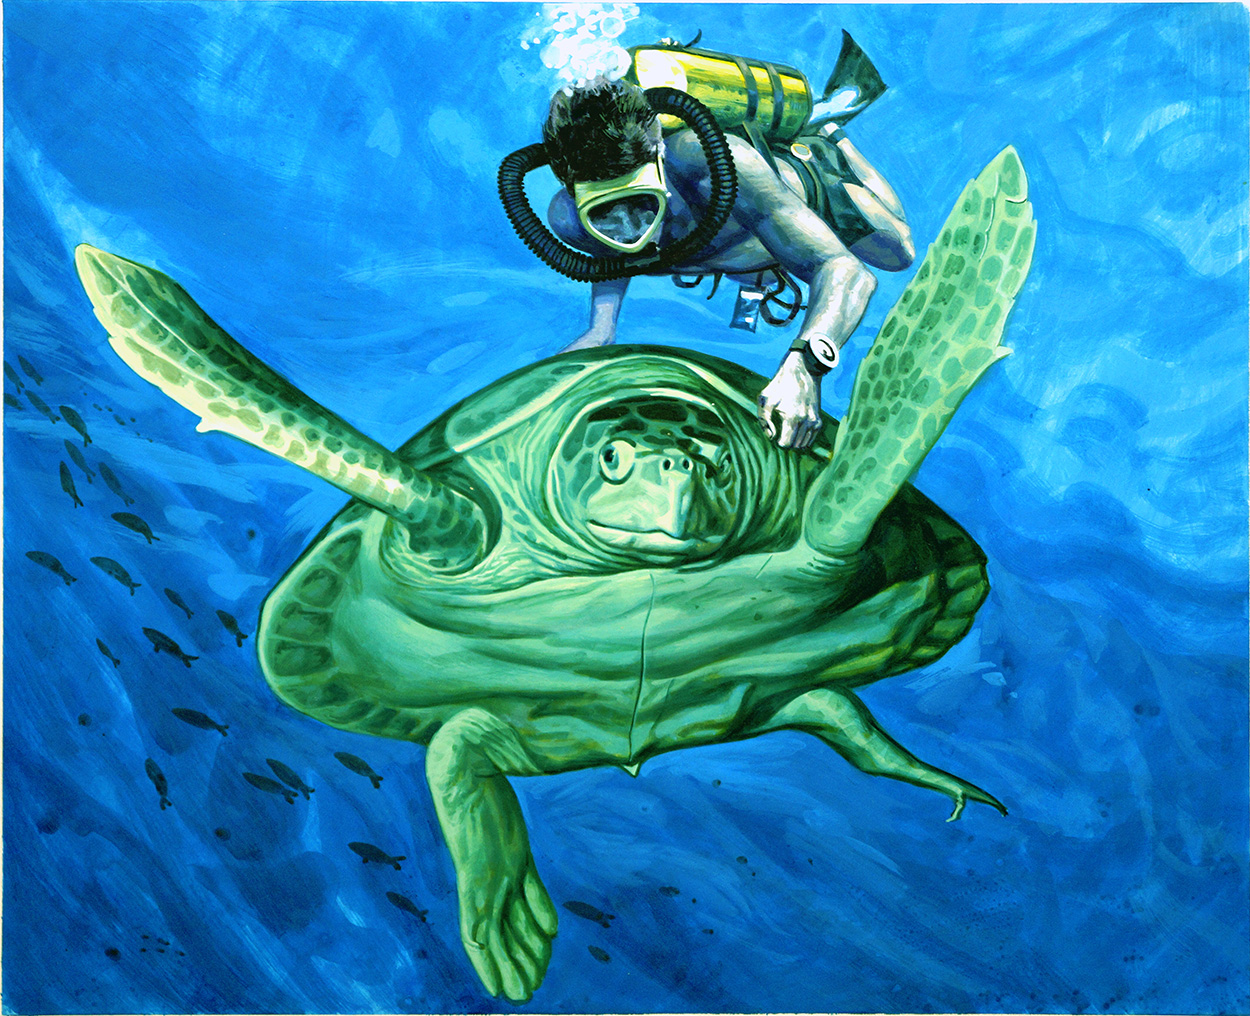 Sea Turtle and Diver (Original) art by Andrew Howat Art at The Illustration Art Gallery